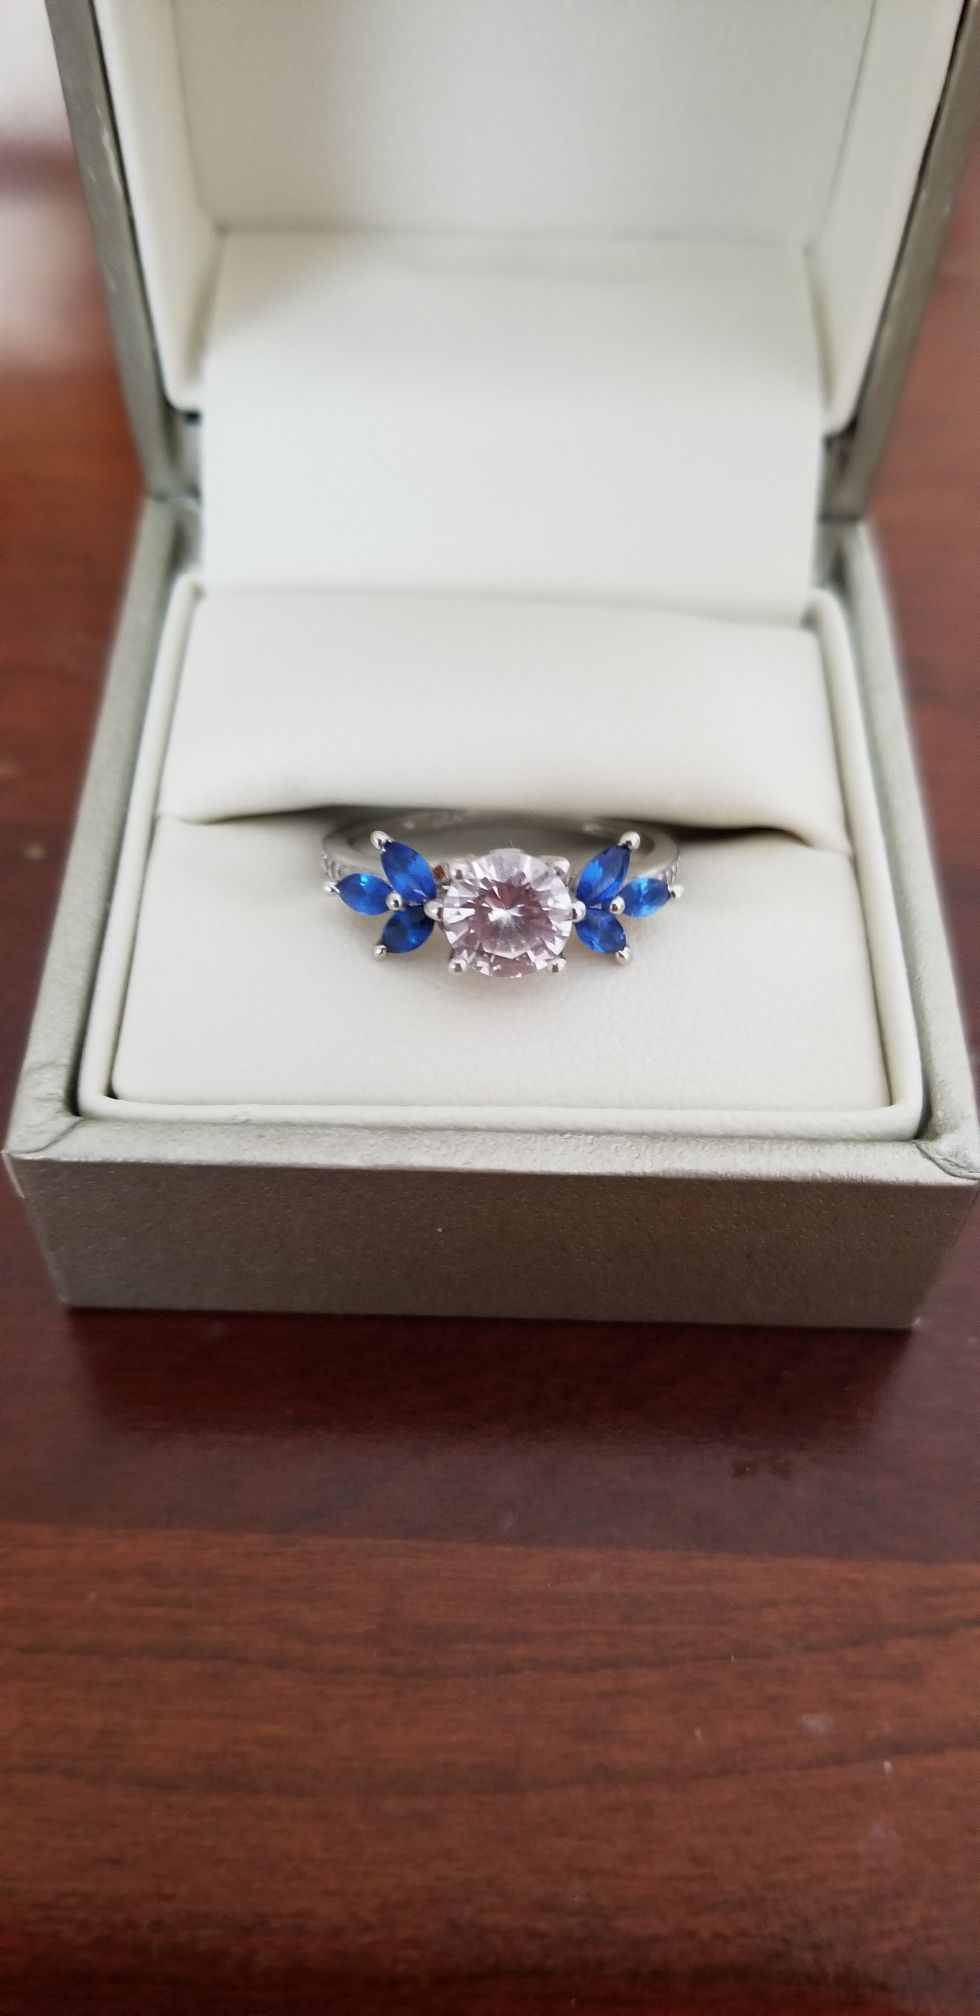 CZ sterling silver promise ring with blue rhinestones size 6